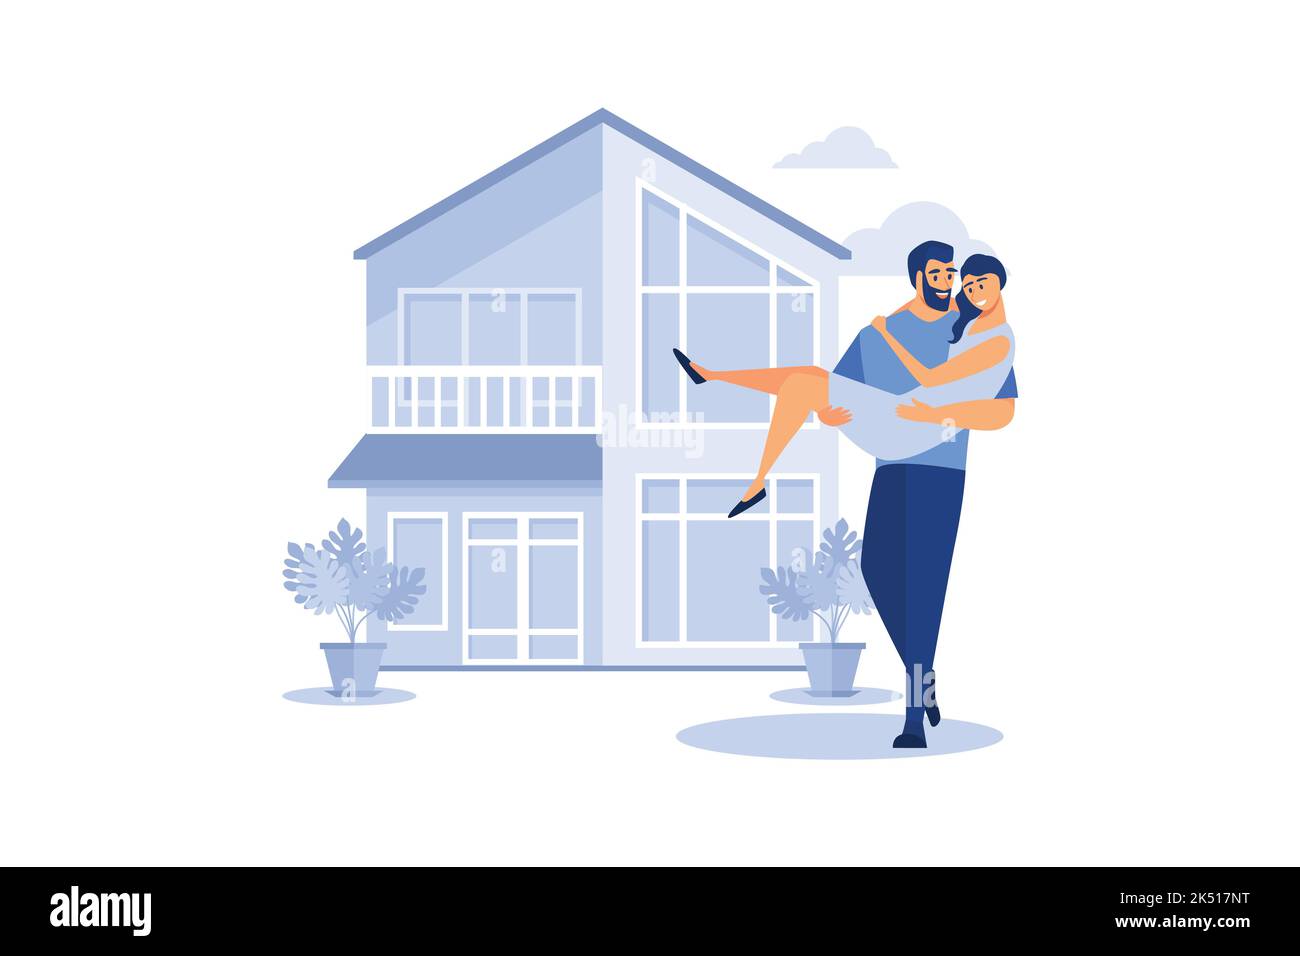 https://c8.alamy.com/comp/2K517NT/woman-being-carried-by-her-lover-outside-his-house-young-people-bought-the-new-house-vector-flat-illustration-happy-family-is-moving-into-new-home-2K517NT.jpg